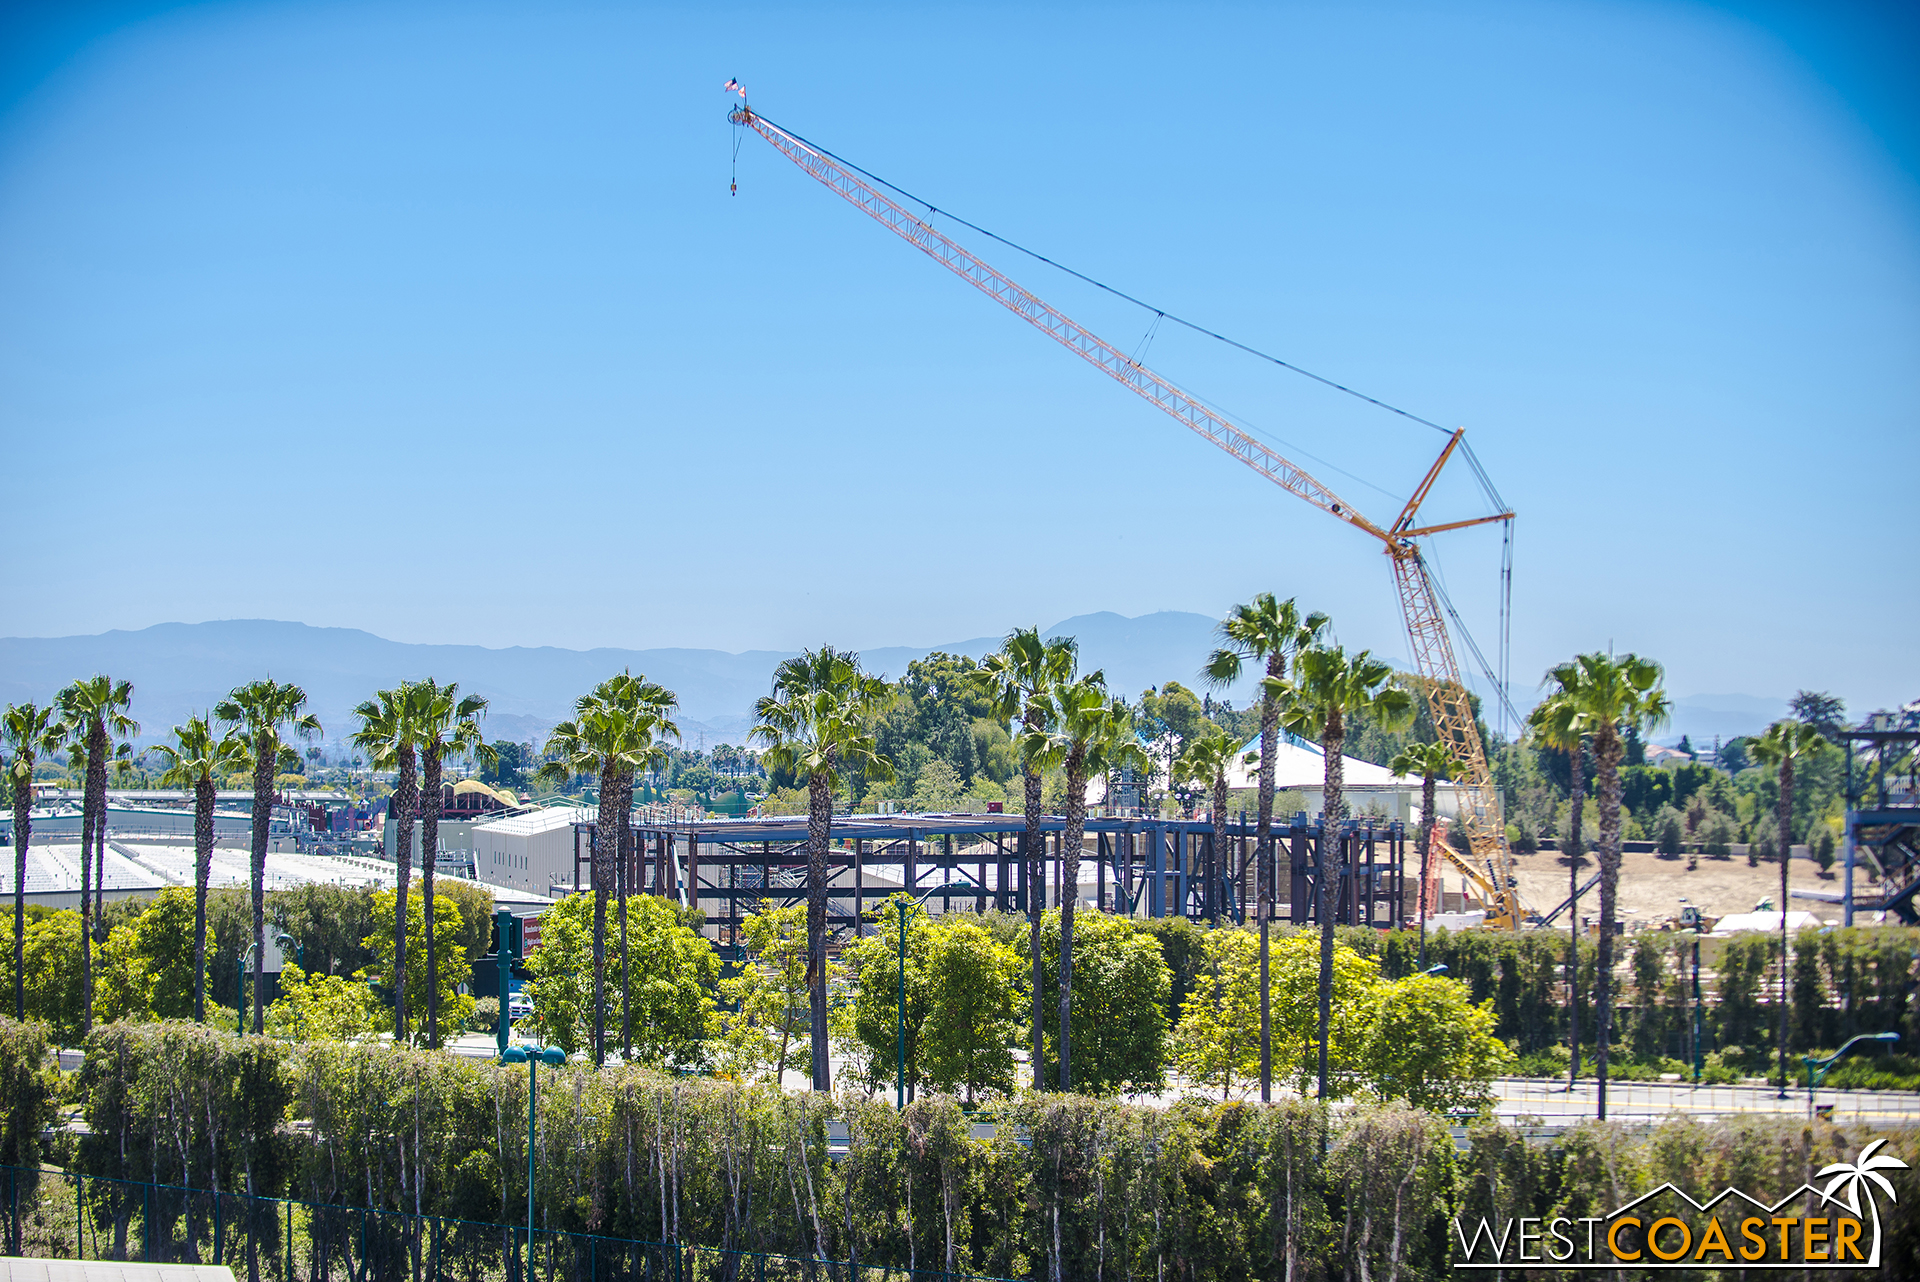  Moving towards Mickey's Toontown, we see that the Millennium Falcon building has grown too. 